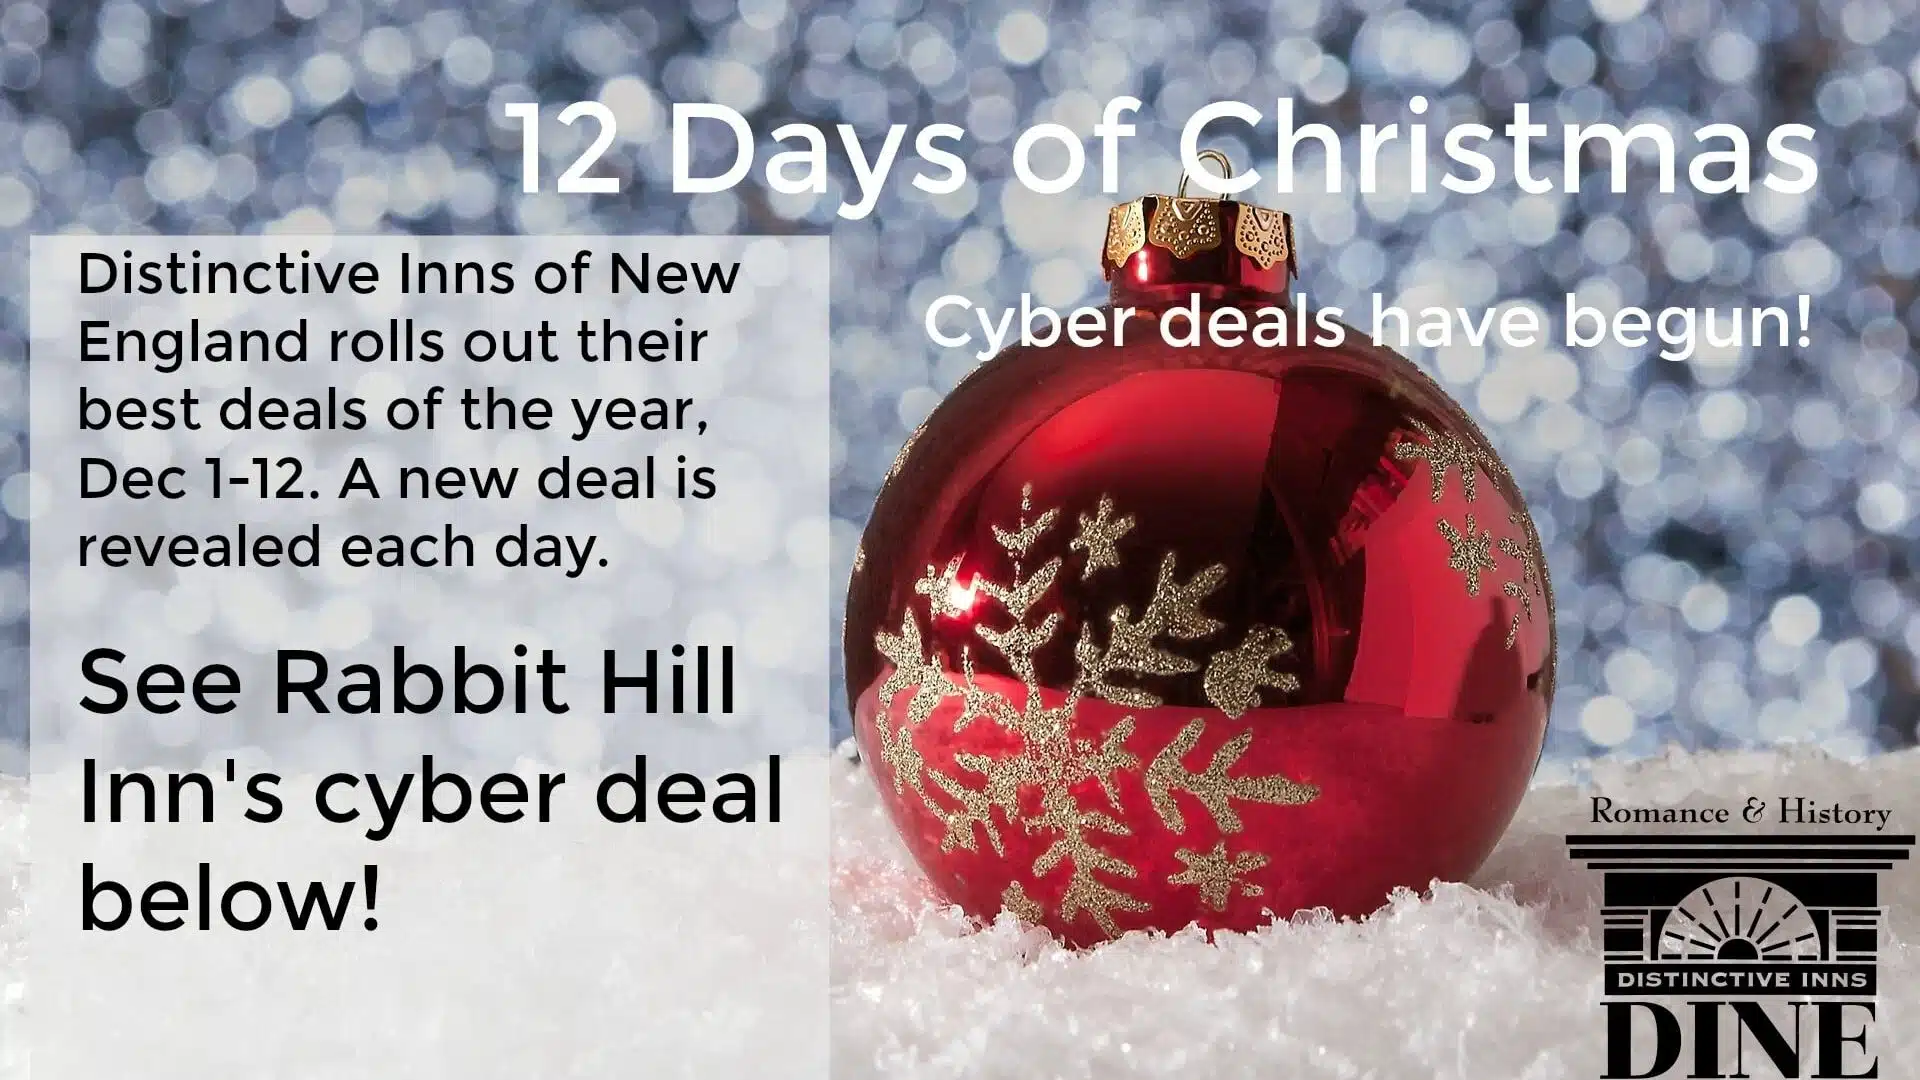 Rabbit Hill Inn cyber winter deals|Distinctive Inns of New England|couples feet in socks by the fire|romantic couple by the fire sipping wine||Rabbit Hill Inn winter deal